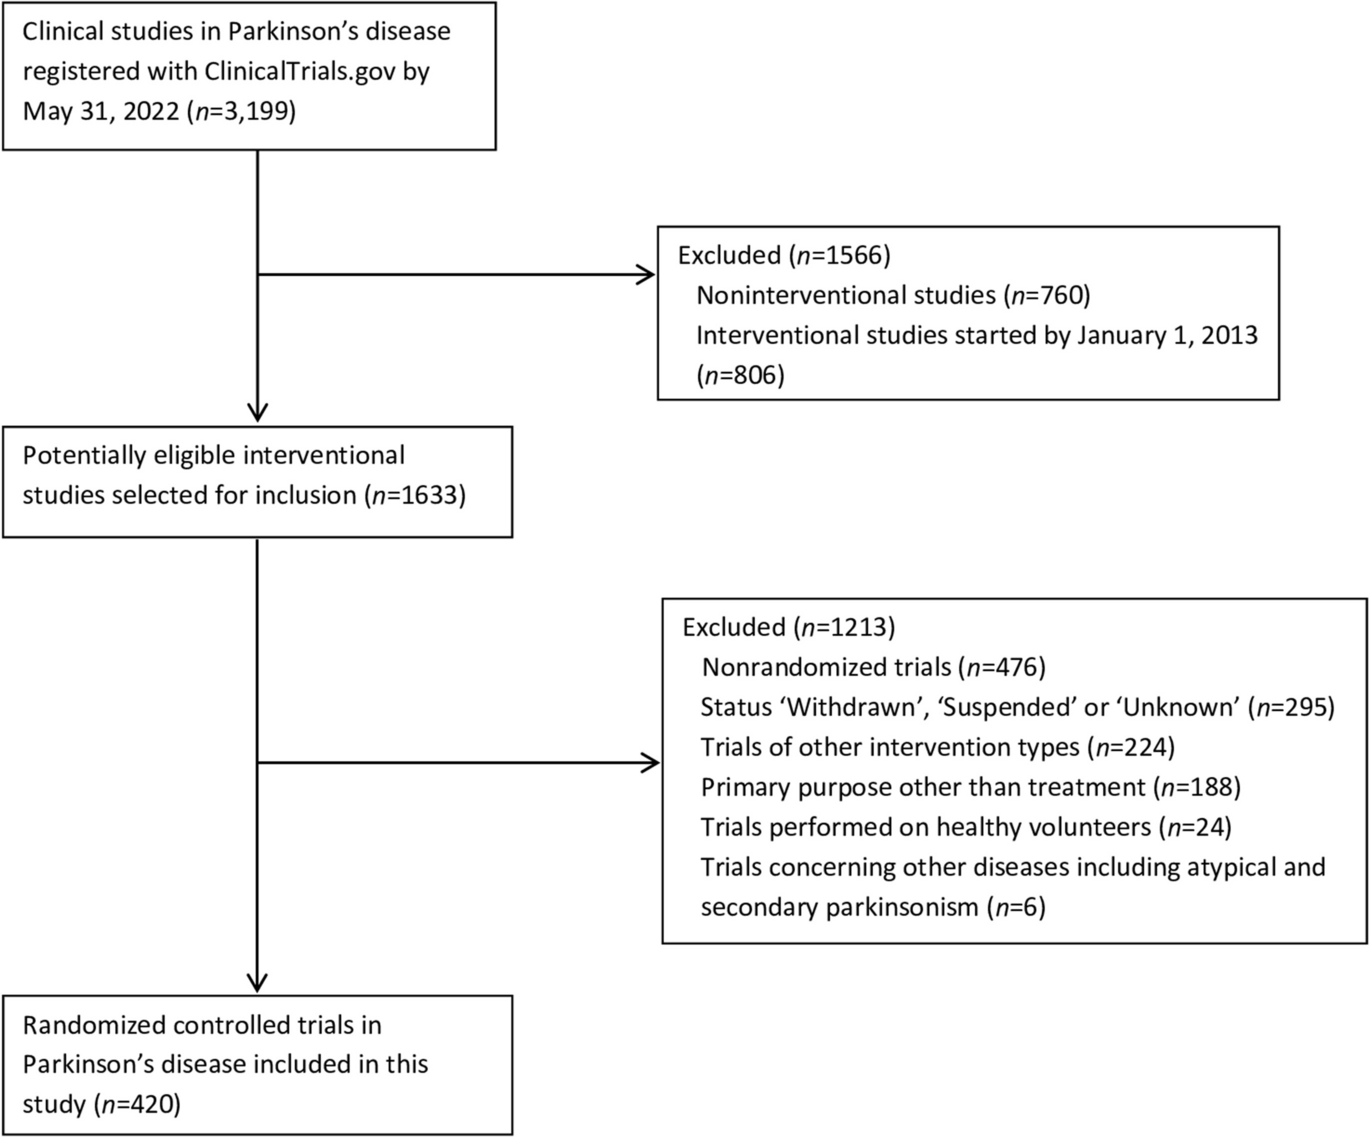 Exclusion of older patients from randomized clinical trials in Parkinson’s disease